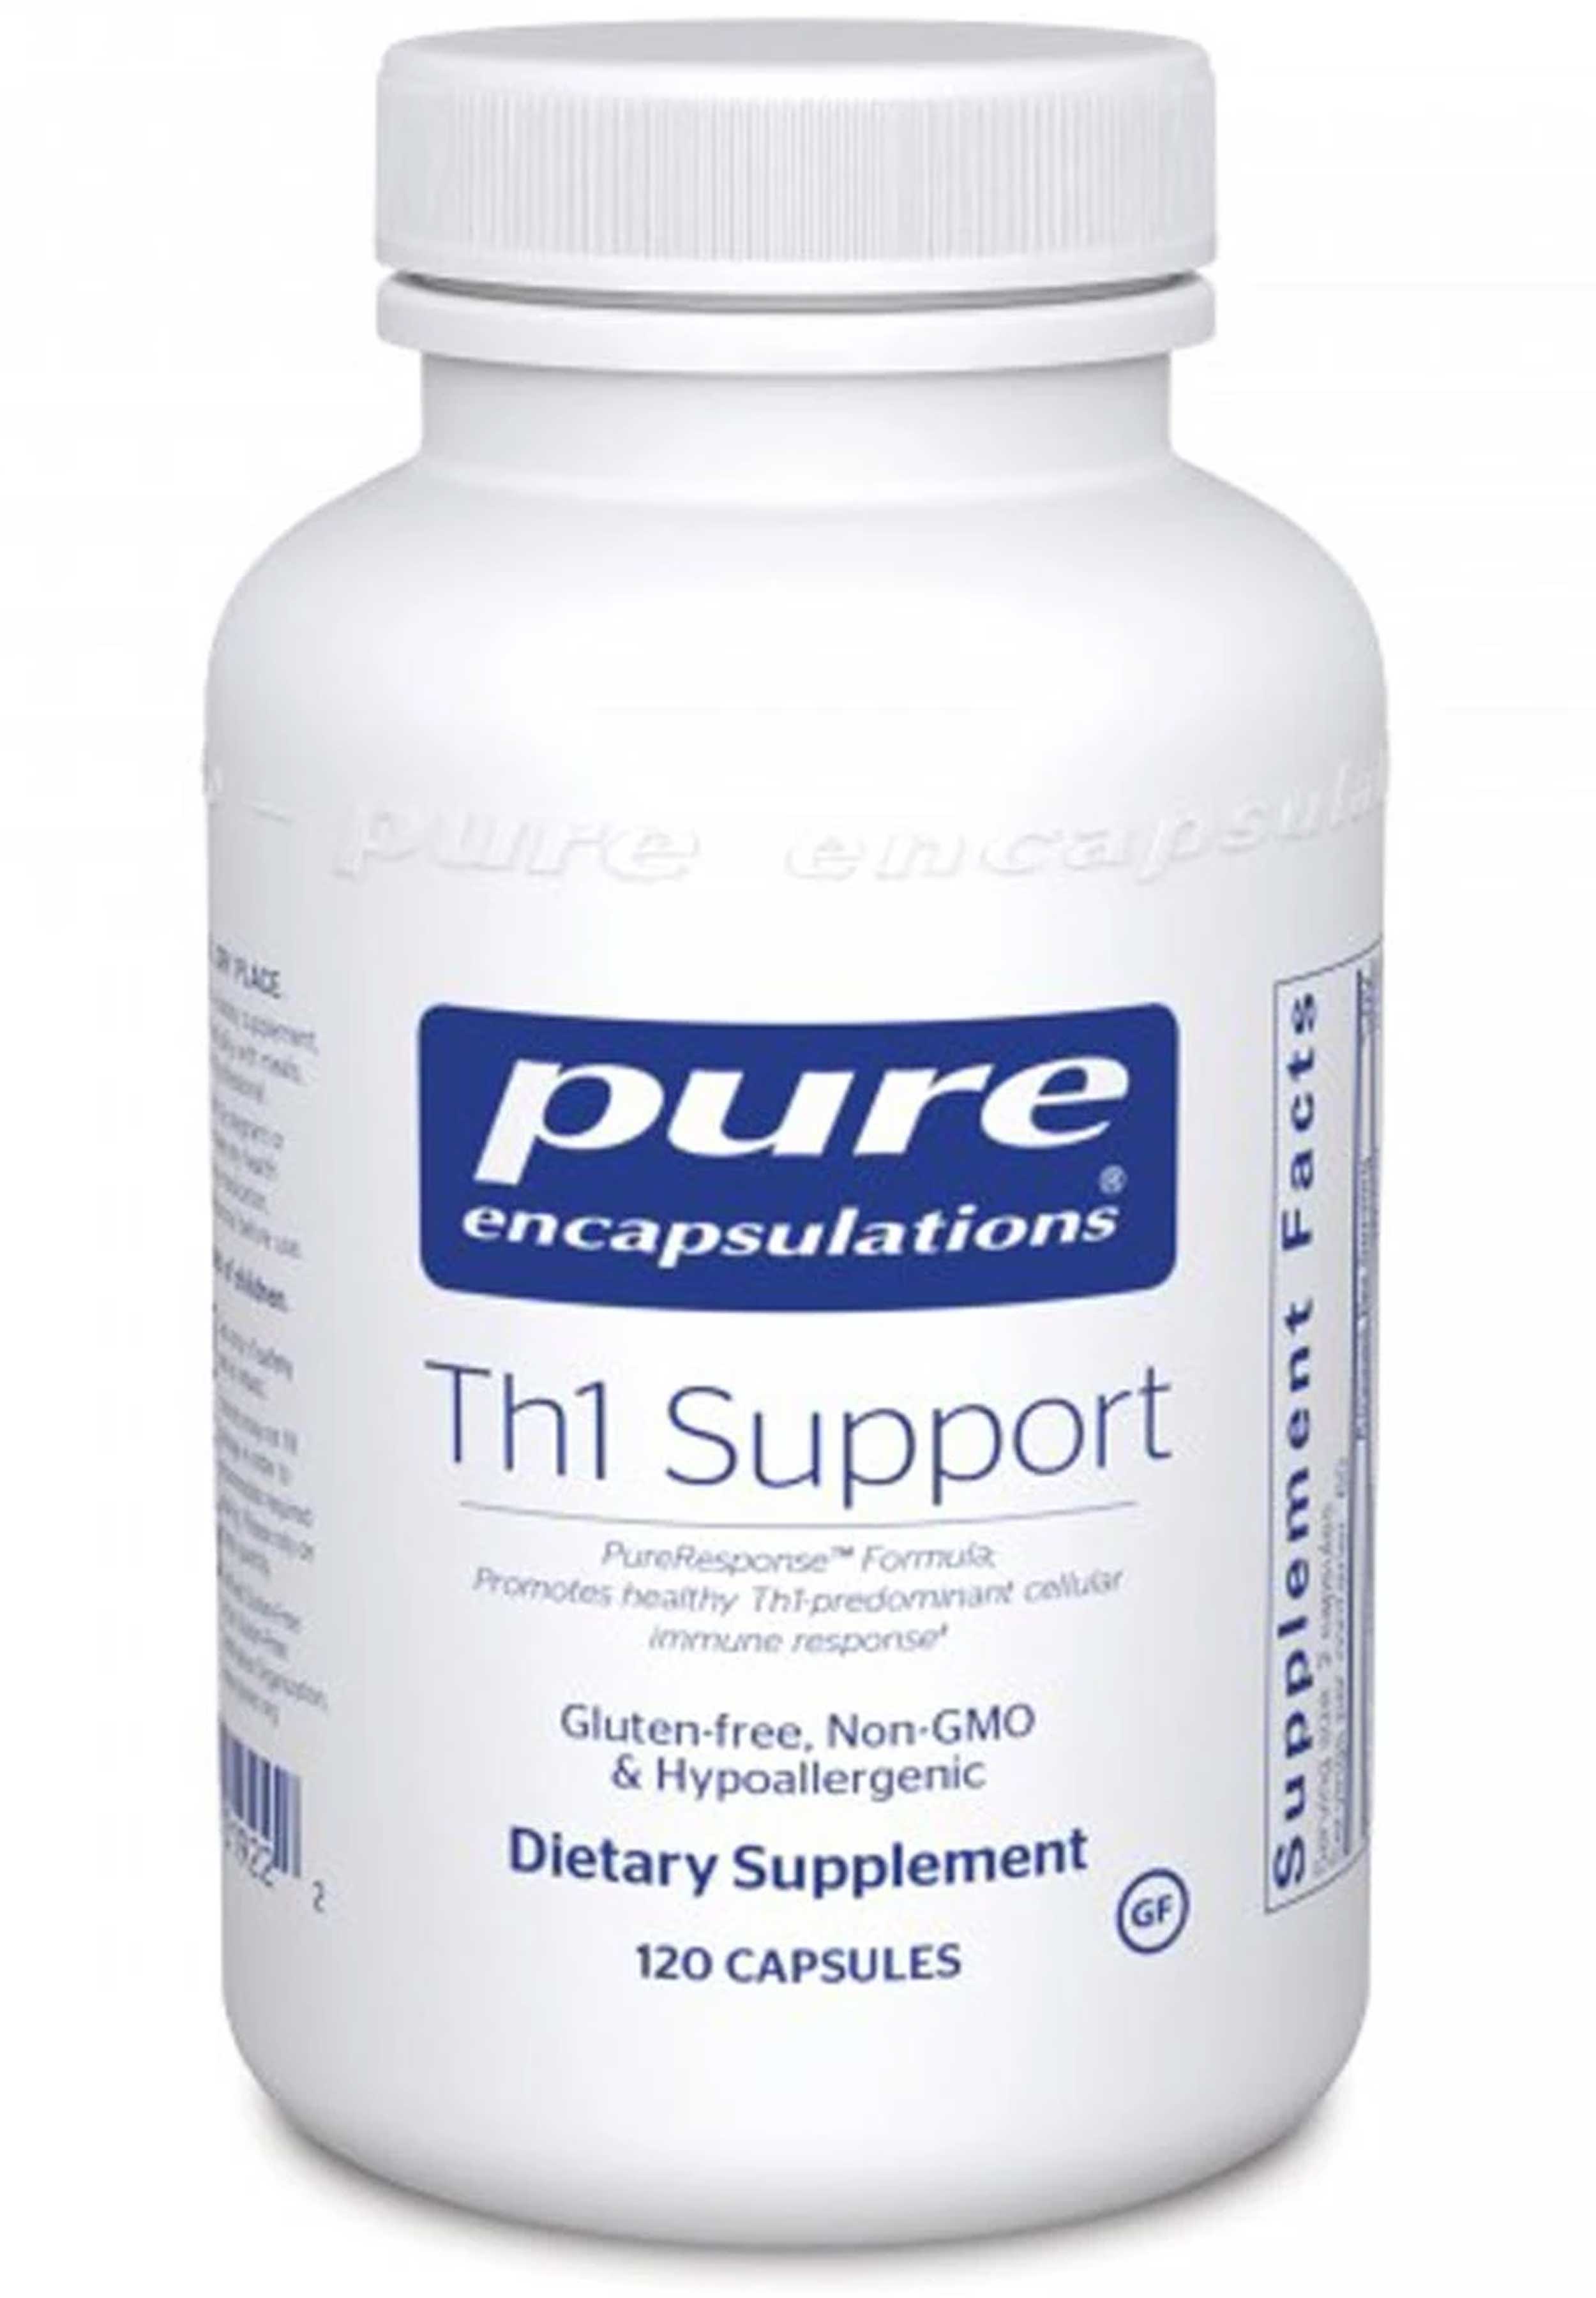 Pure Encapsulations Th1 Support